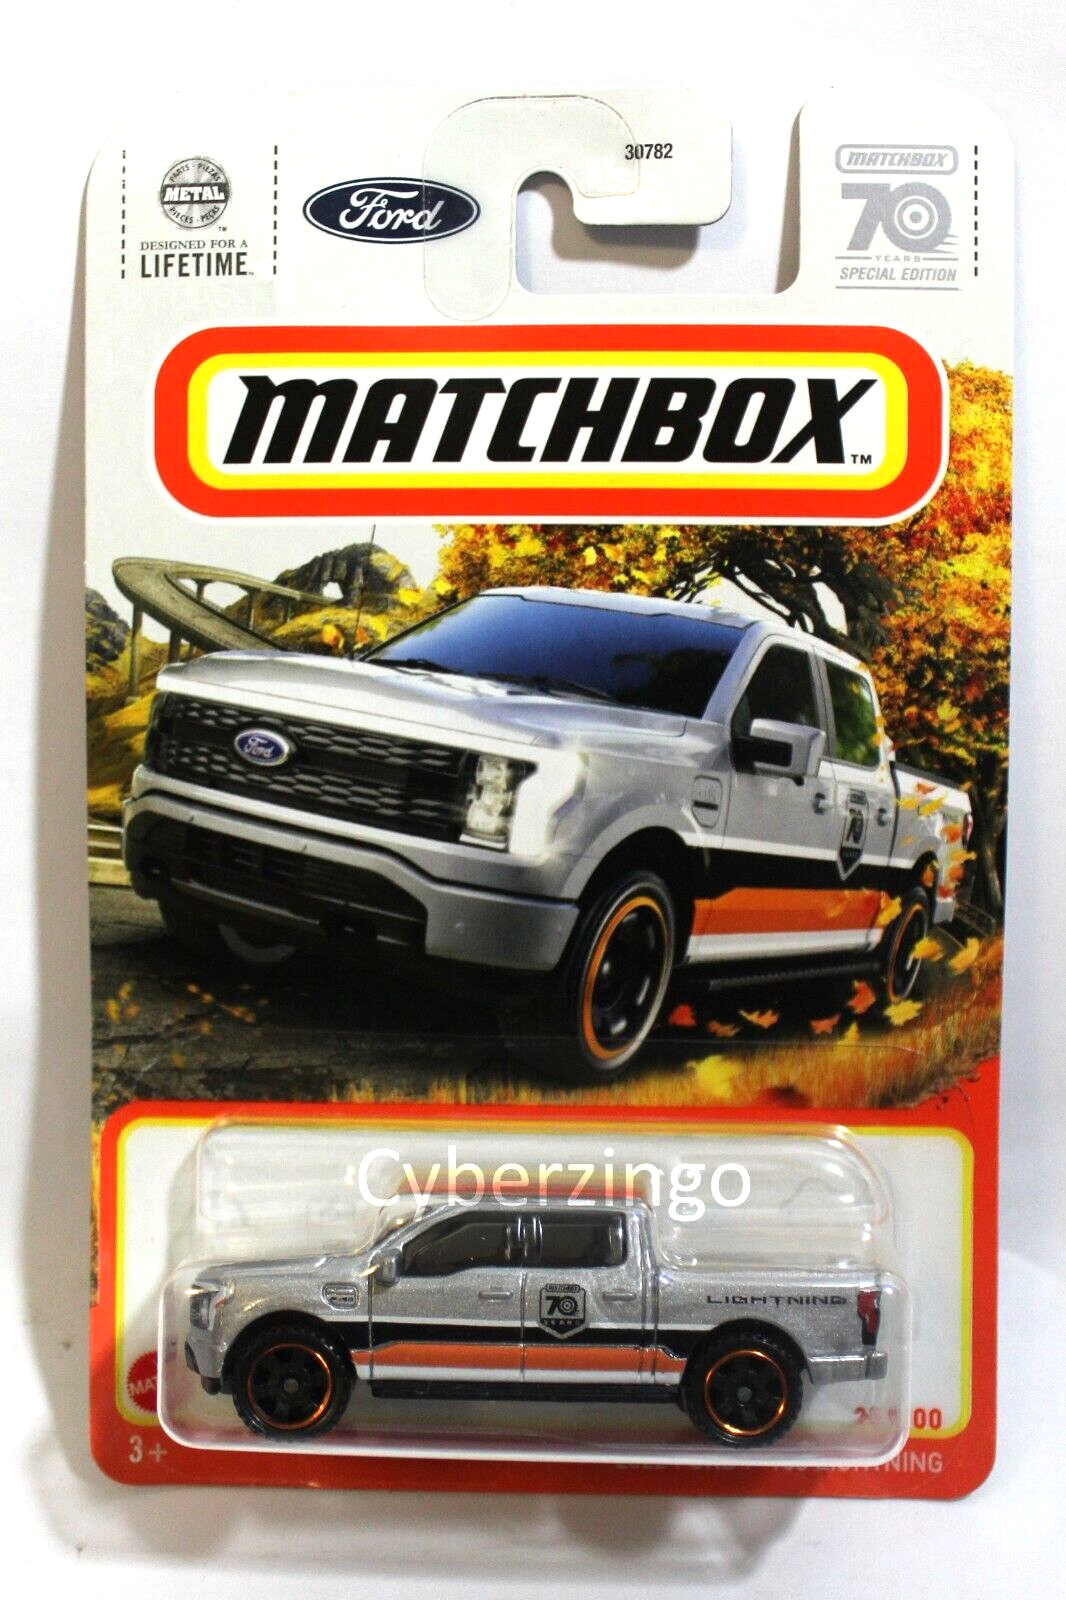 Matchbox 1/64 2022 Ford F-150 Lightning Diecast Model Car NEW IN PACKAGE - $12.97